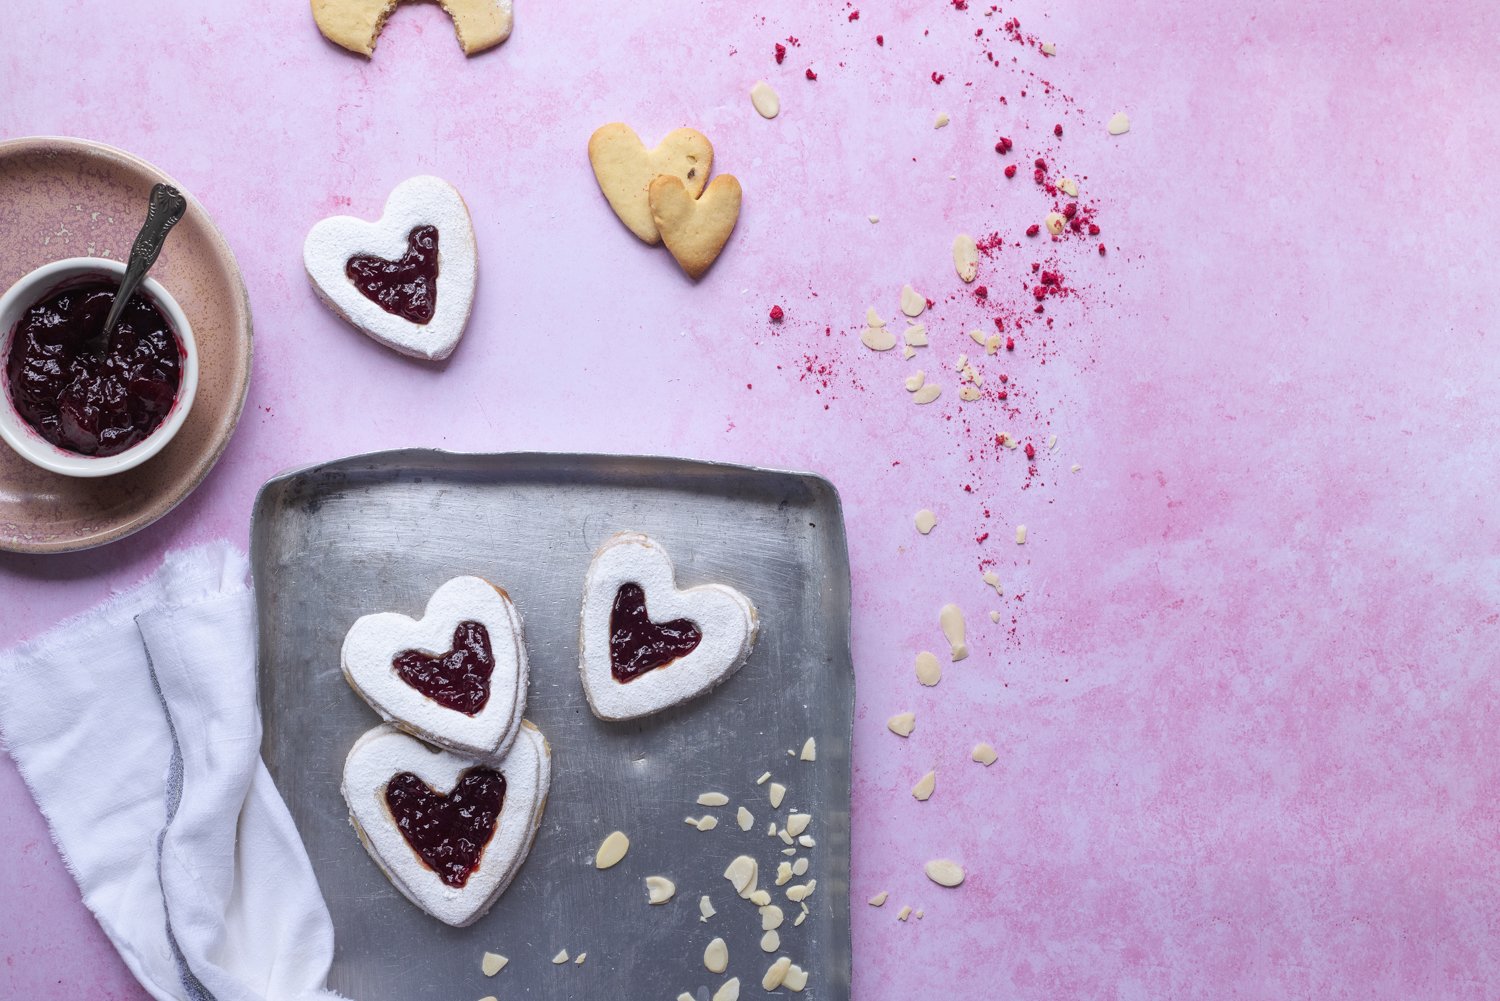 Raspberry Linzer biscuits are a great gift for your vegan valentine.